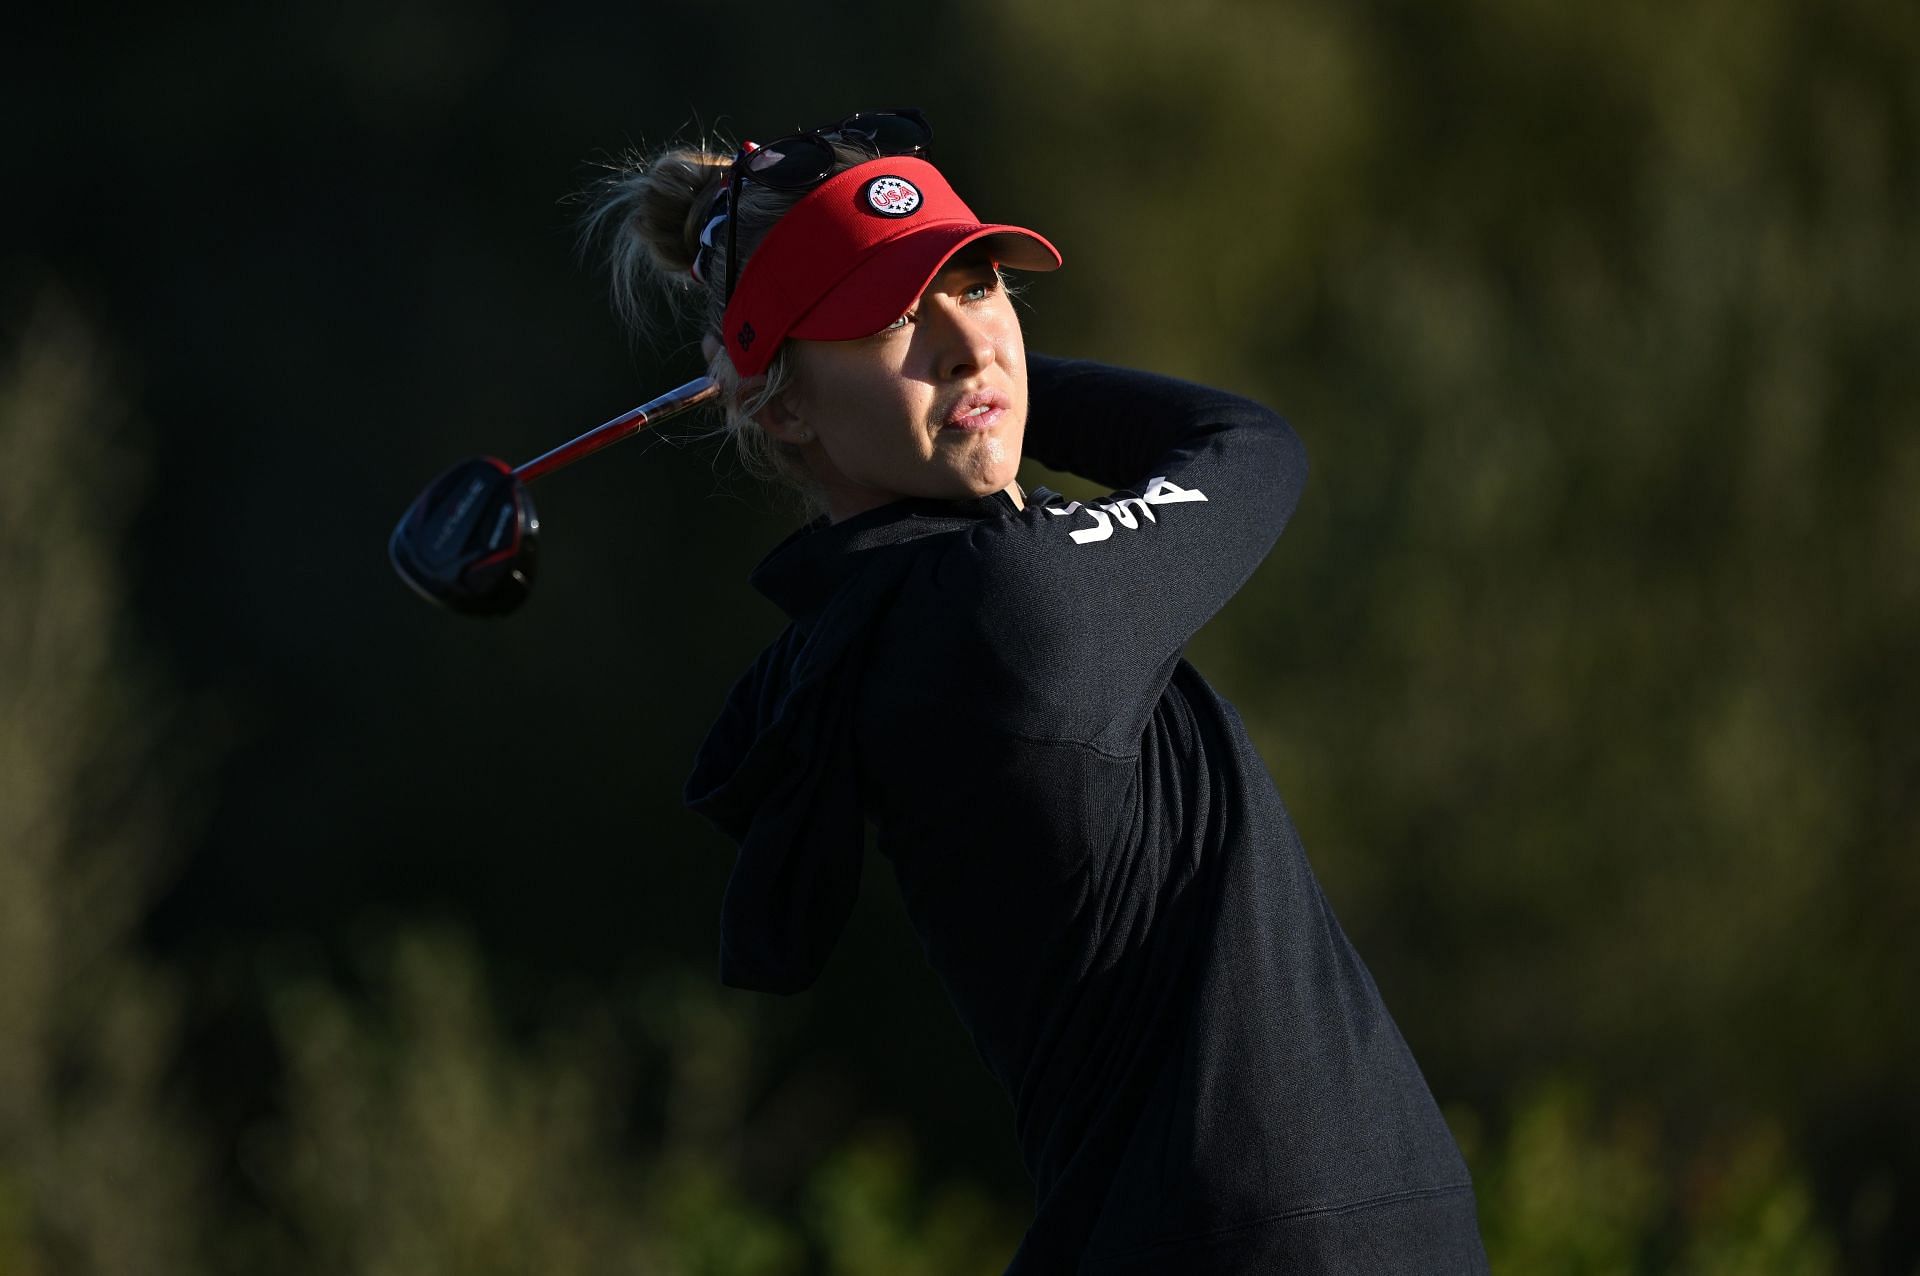 The Solheim Cup - Preview Day Two